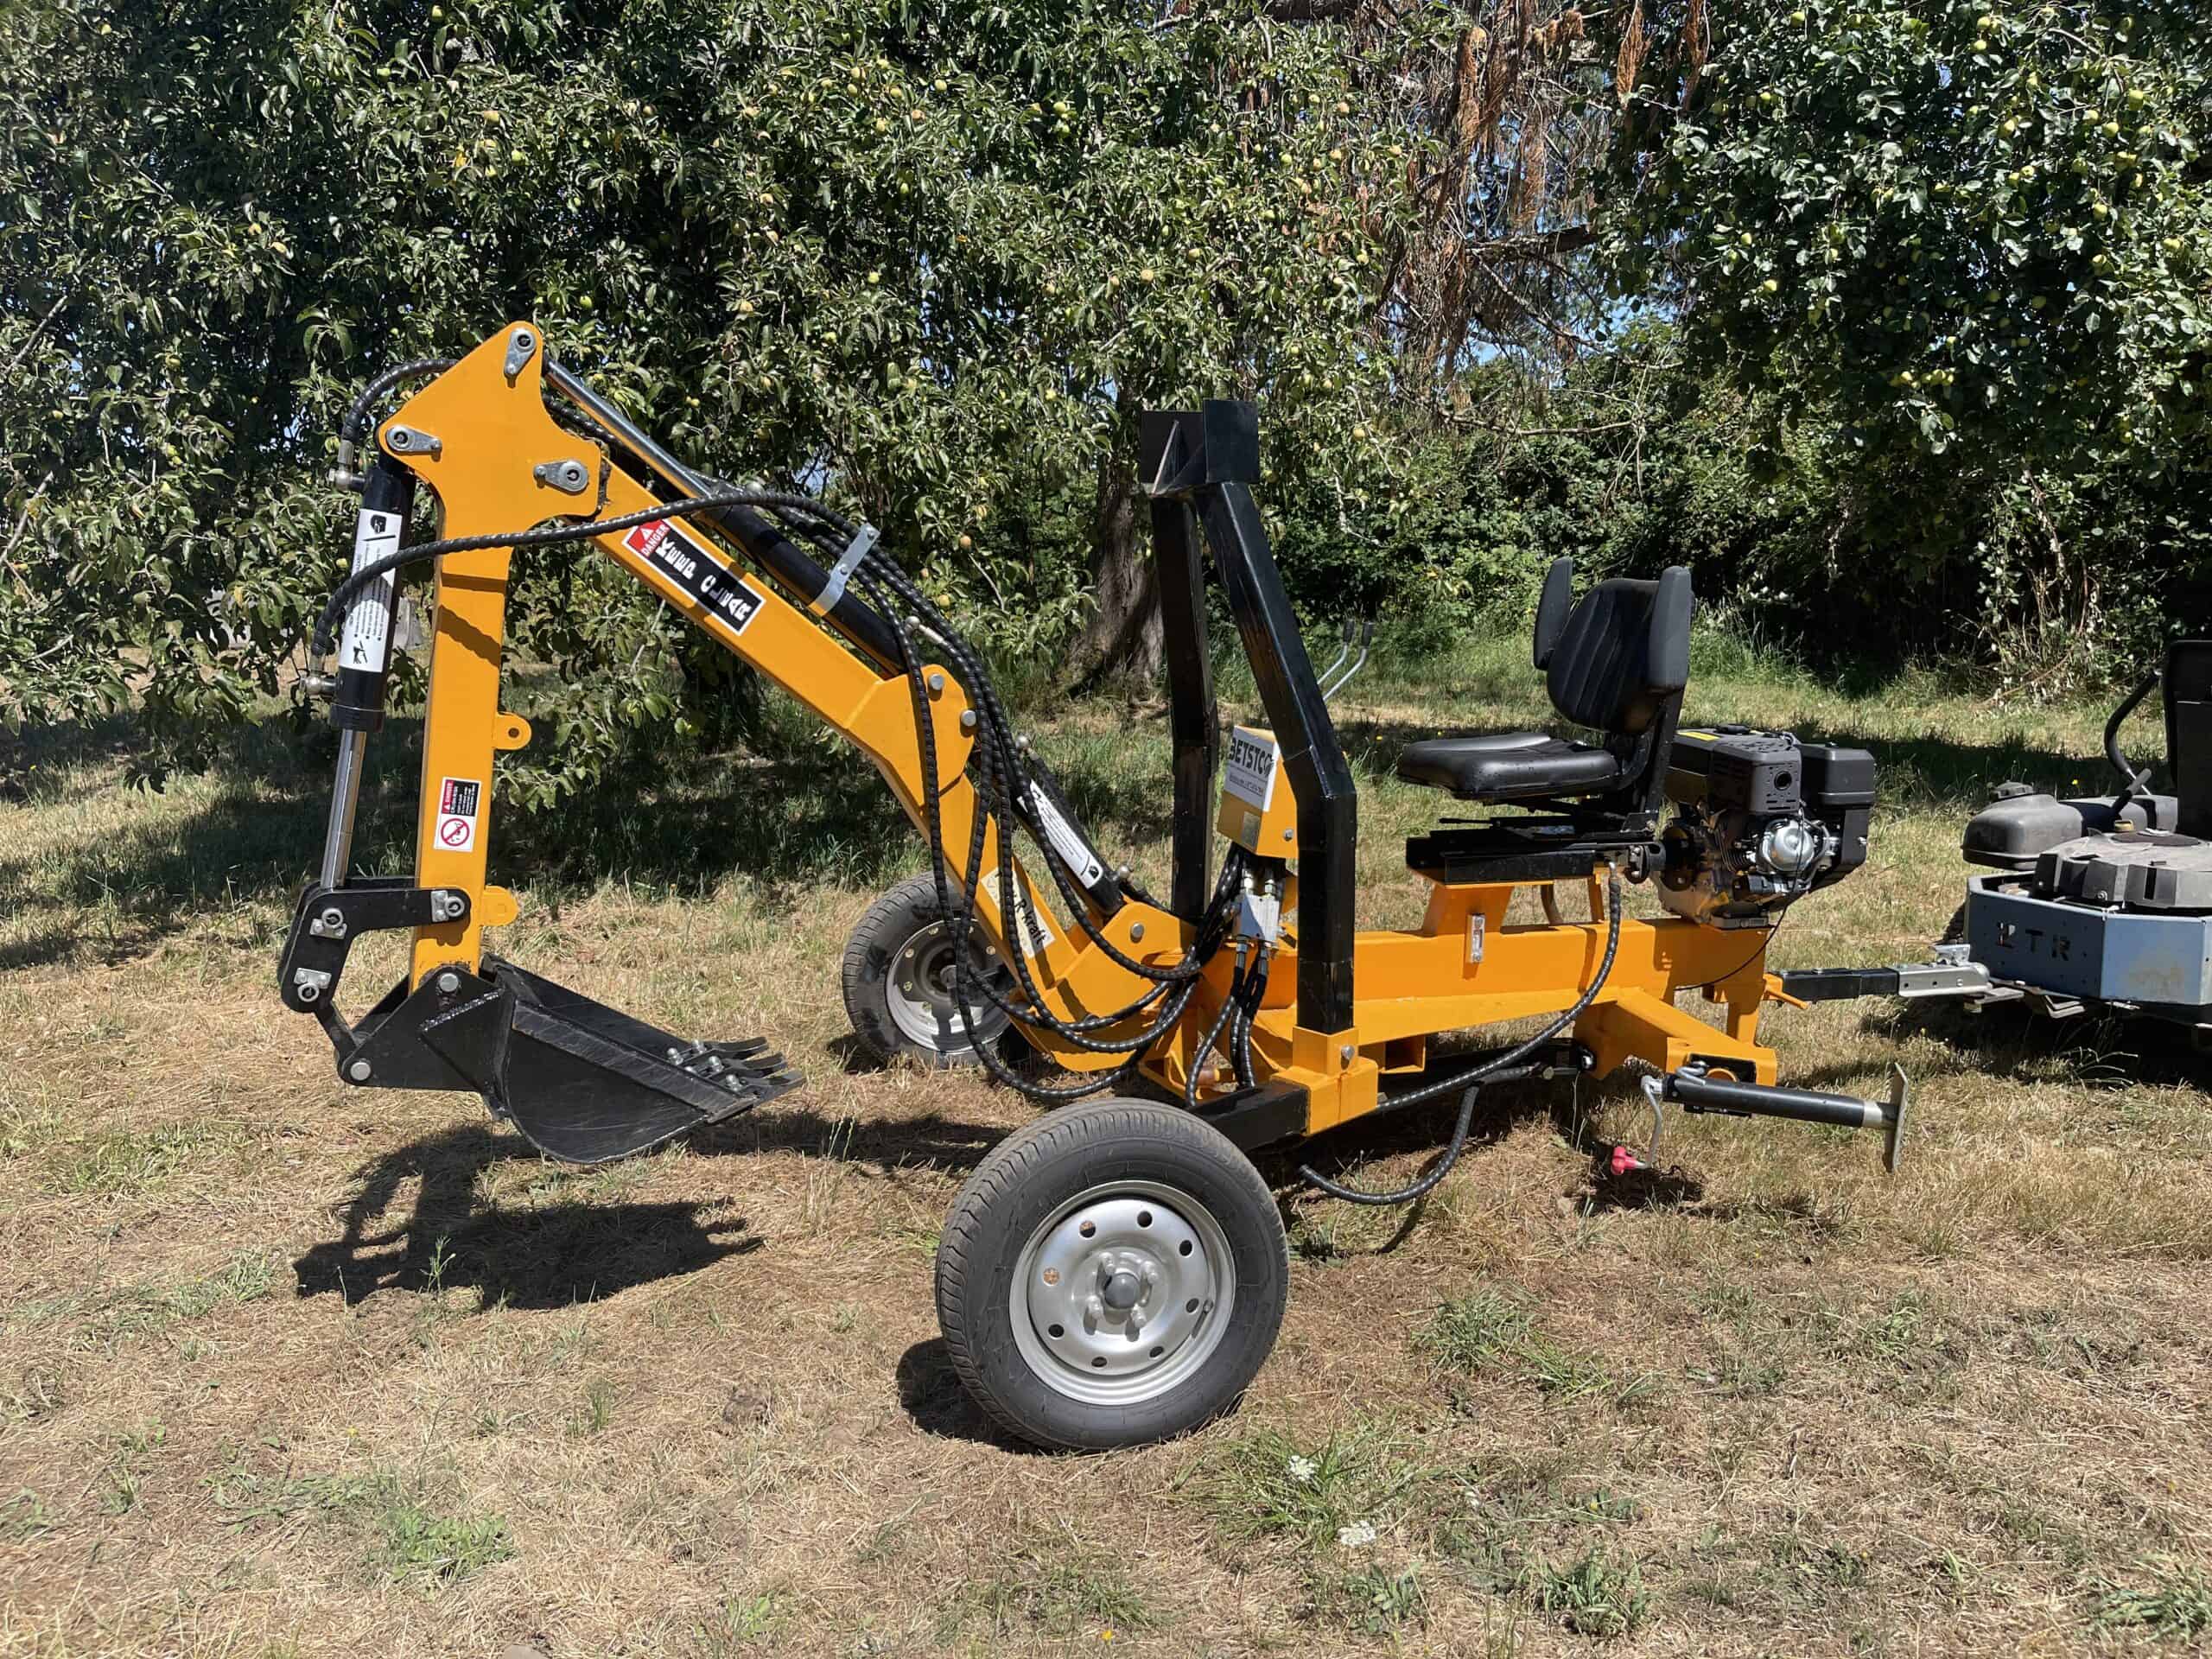 Image of Towable tiller with single wheel and rotating blades